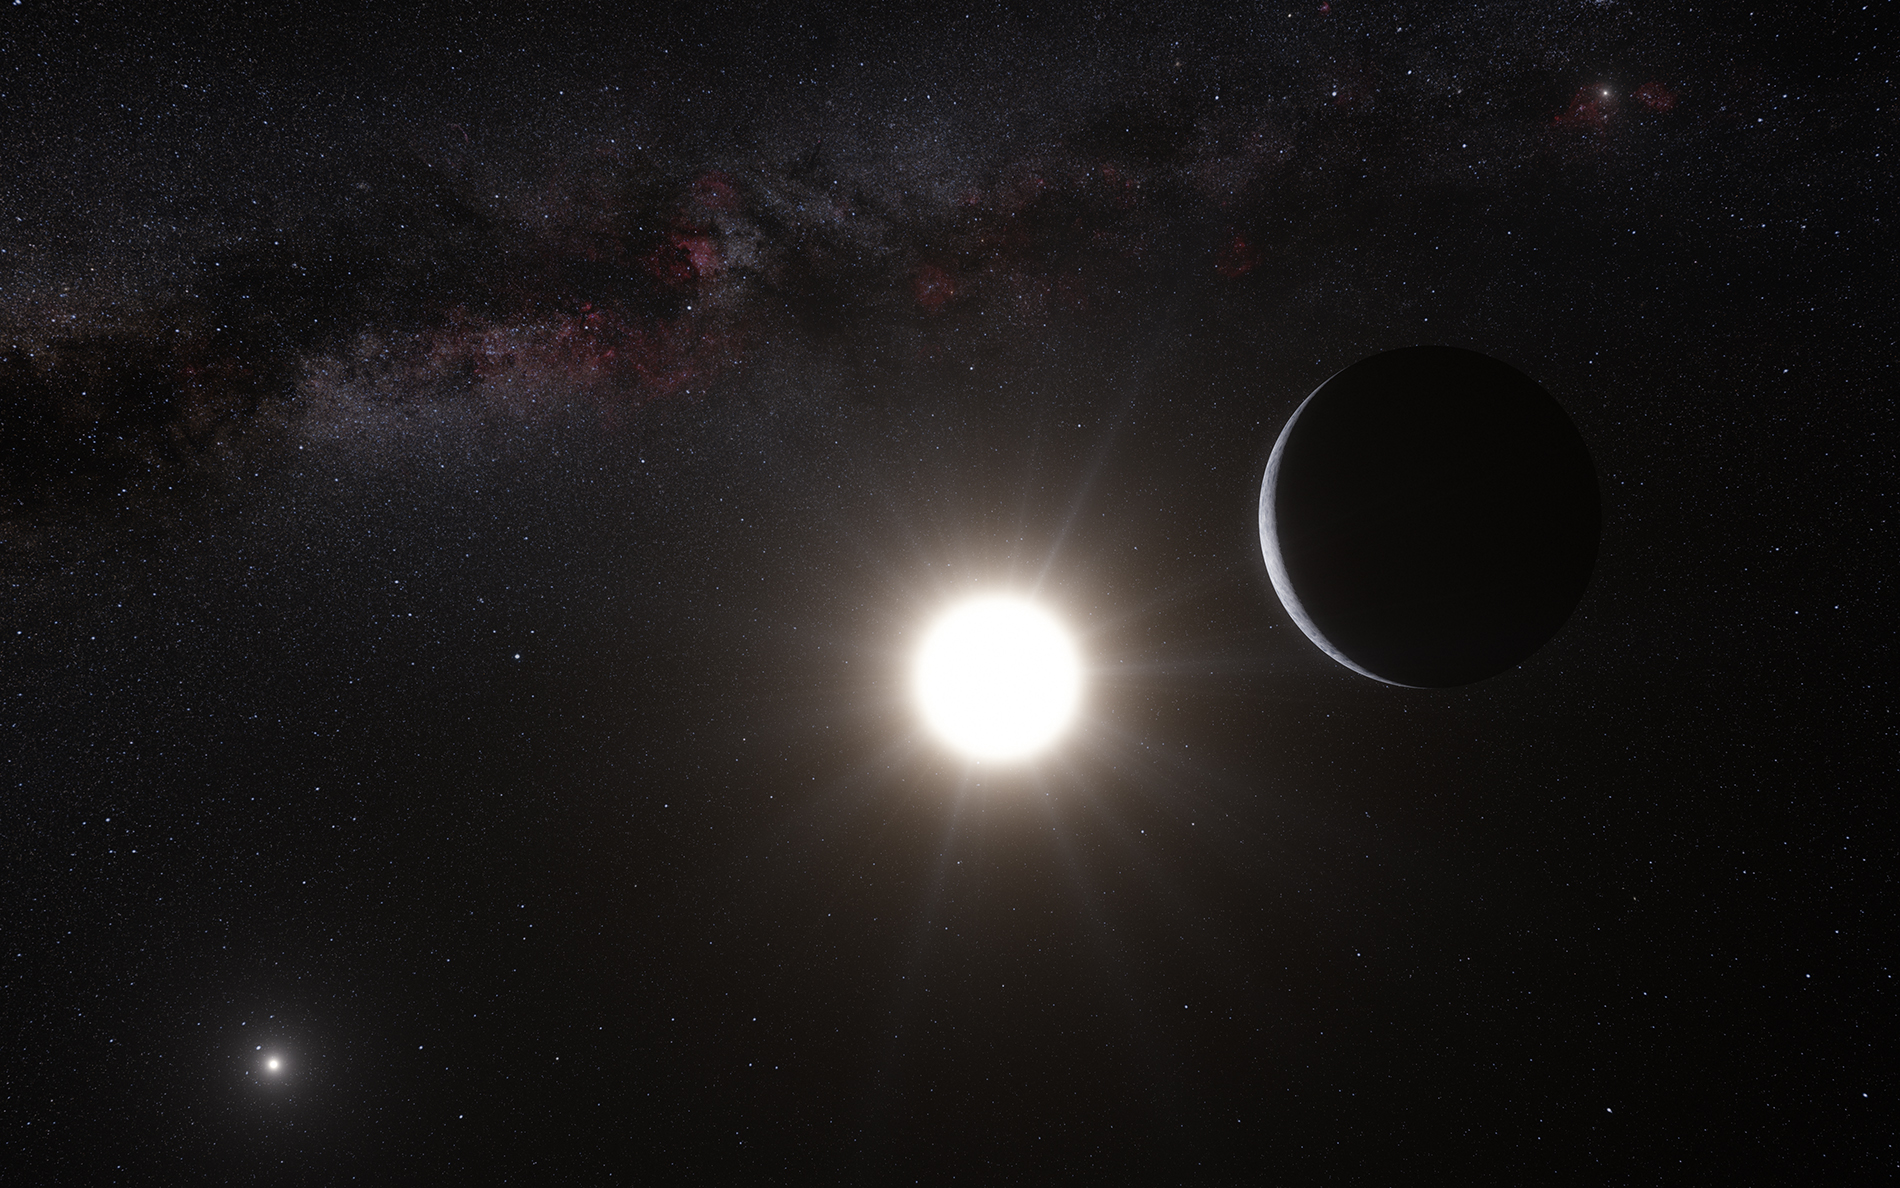 An Earth-mass planet has been spotted orbiting Alpha Centauri B, the closest star system to our own.